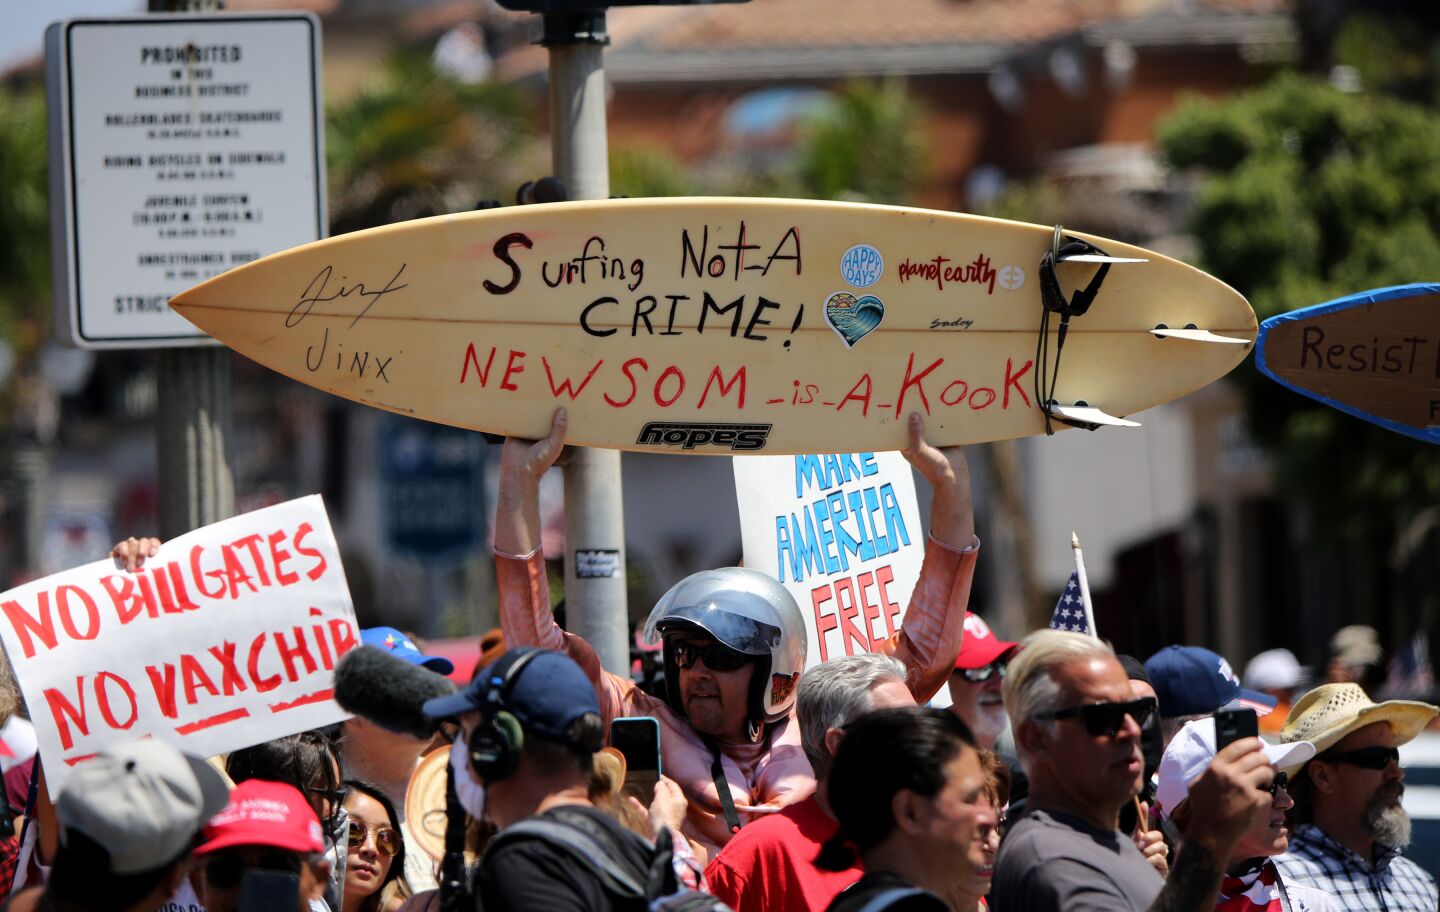 Protesters hold signs up during the protest in Huntington Beach on Friday.